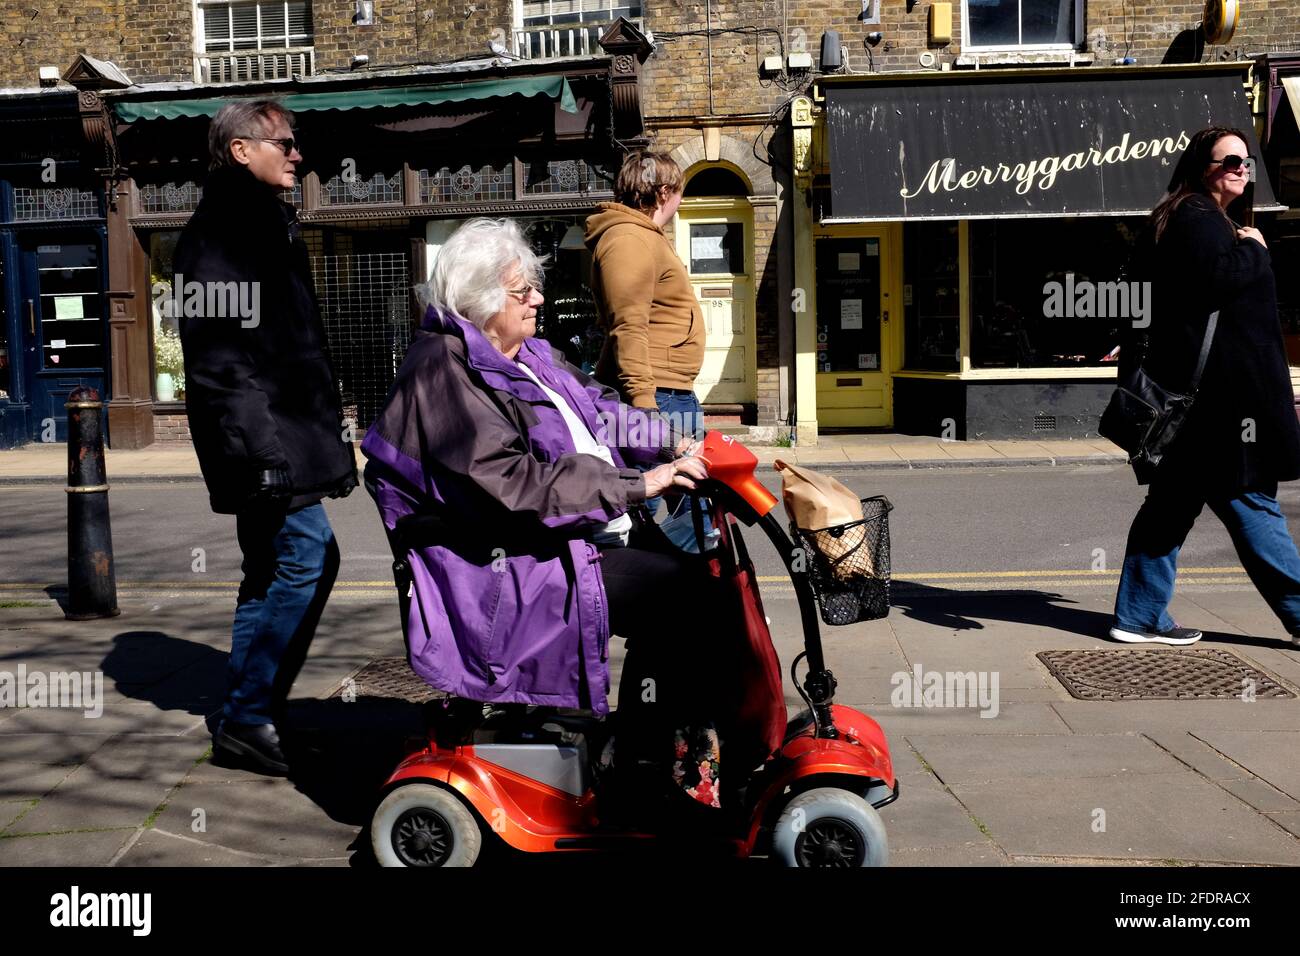 disabled woman in a mobility scooter,deal town,east kent,uk april 2021 Stock Photo